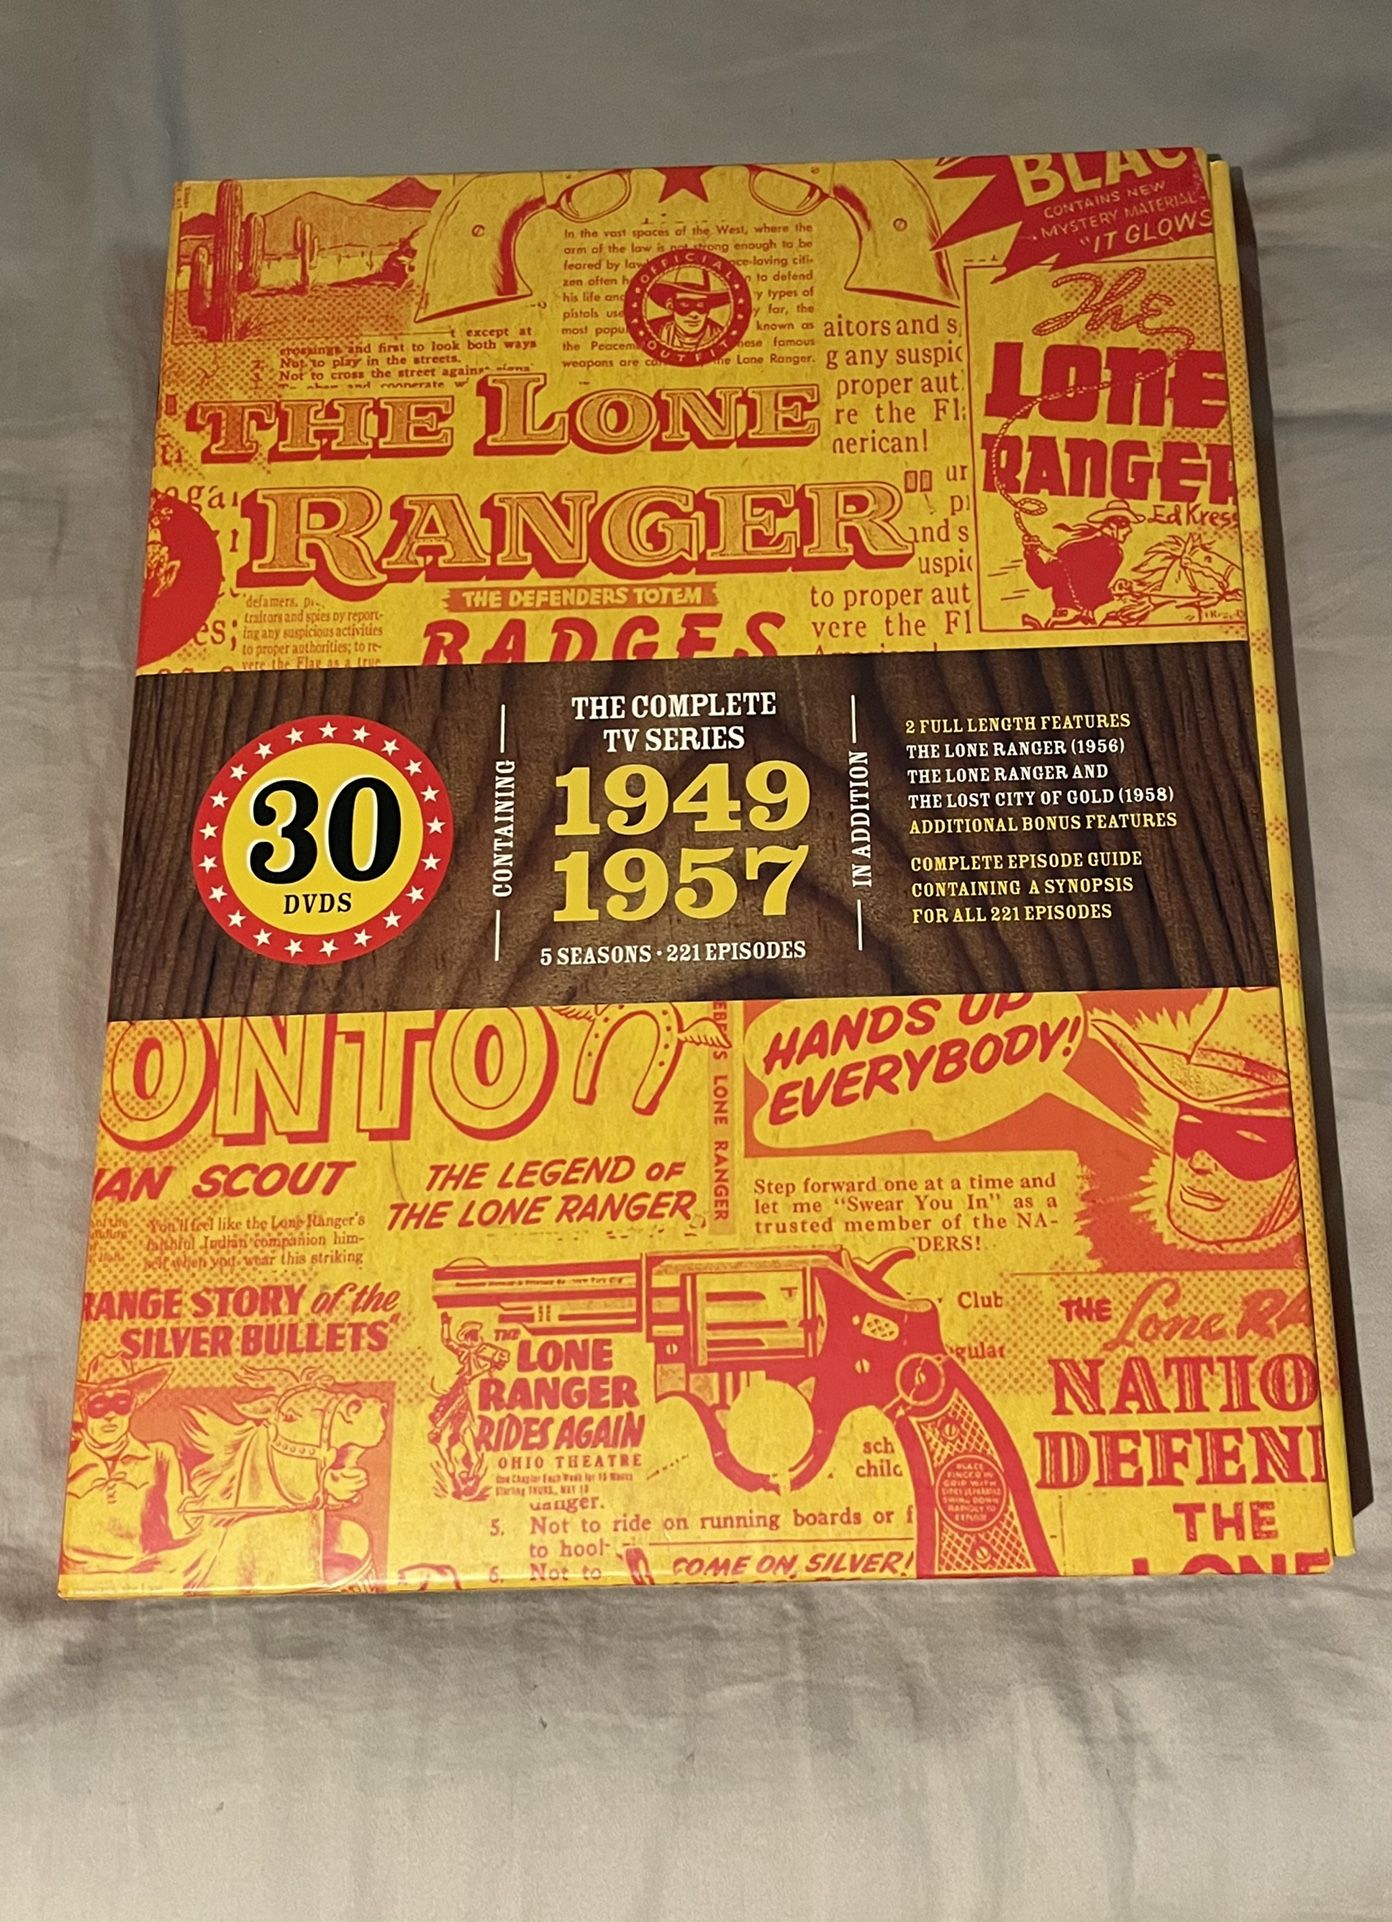 The Lone Ranger Collector's Edition : 5 Seasons / 30 DvDs / 221 Episodes